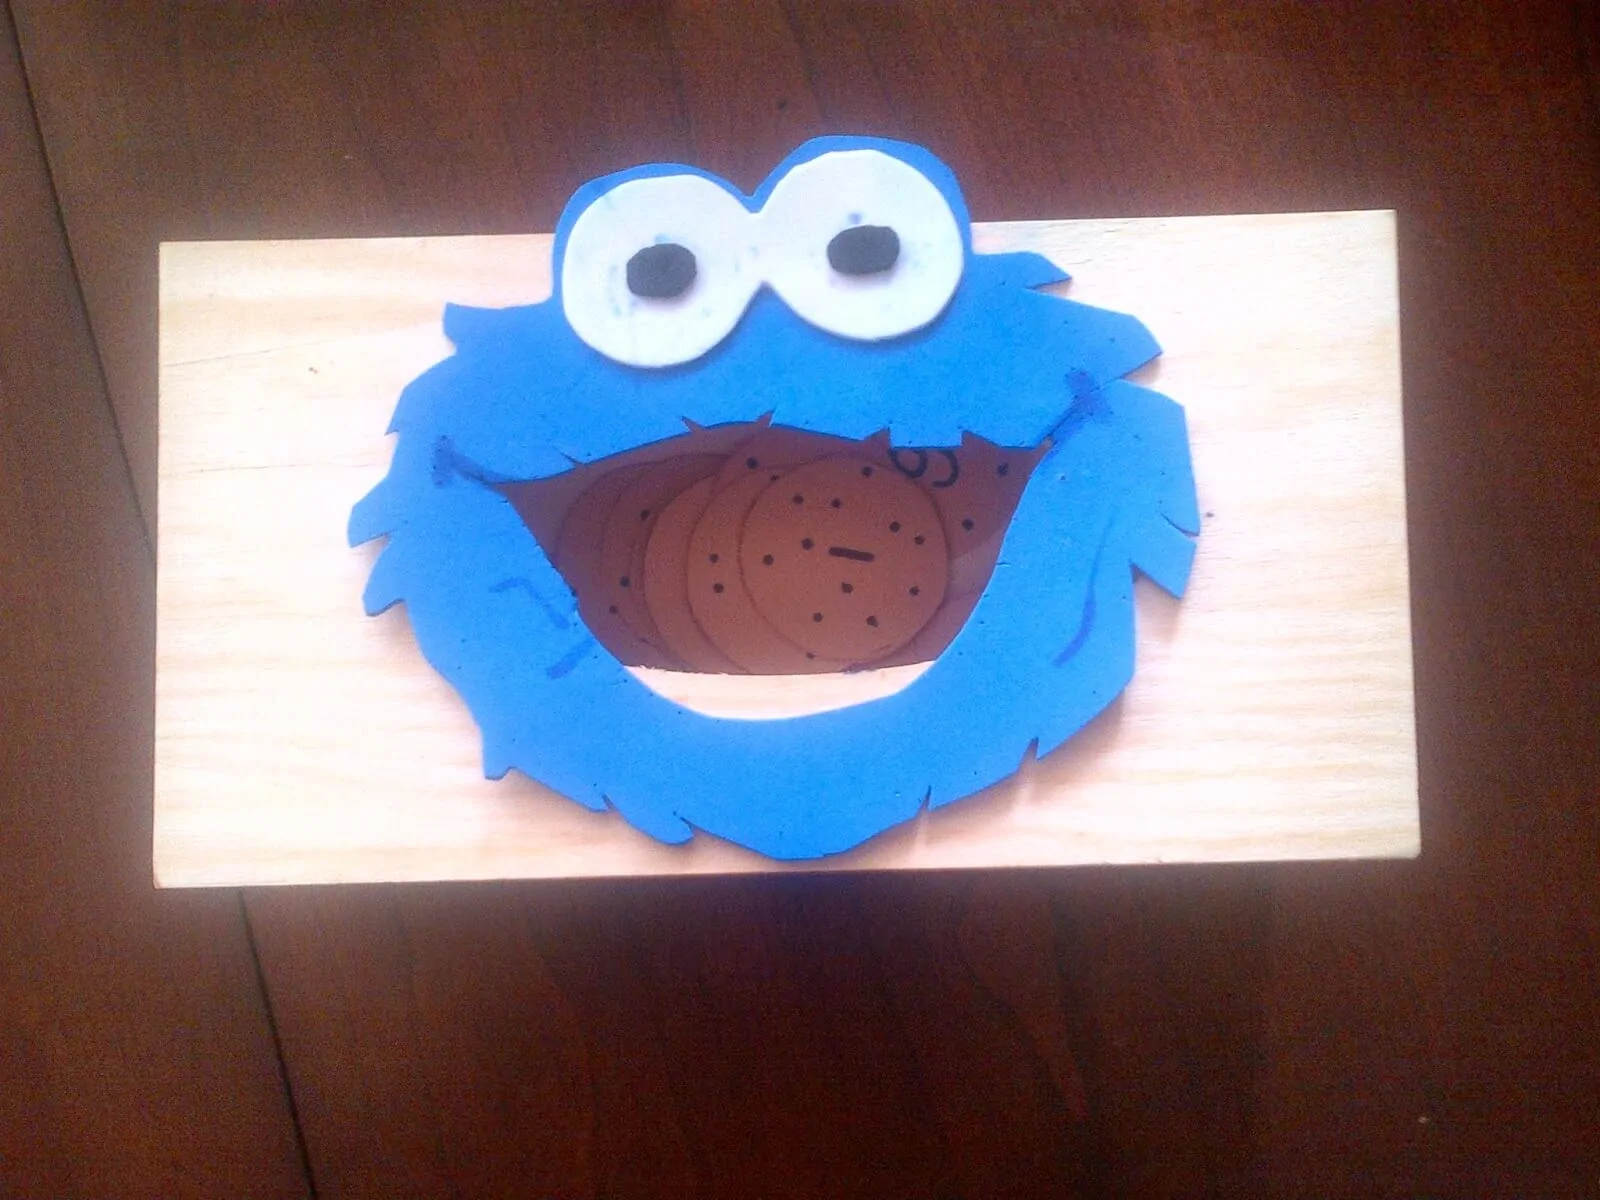 COOKIE MONSTER letter learning game - with free printable to make your own